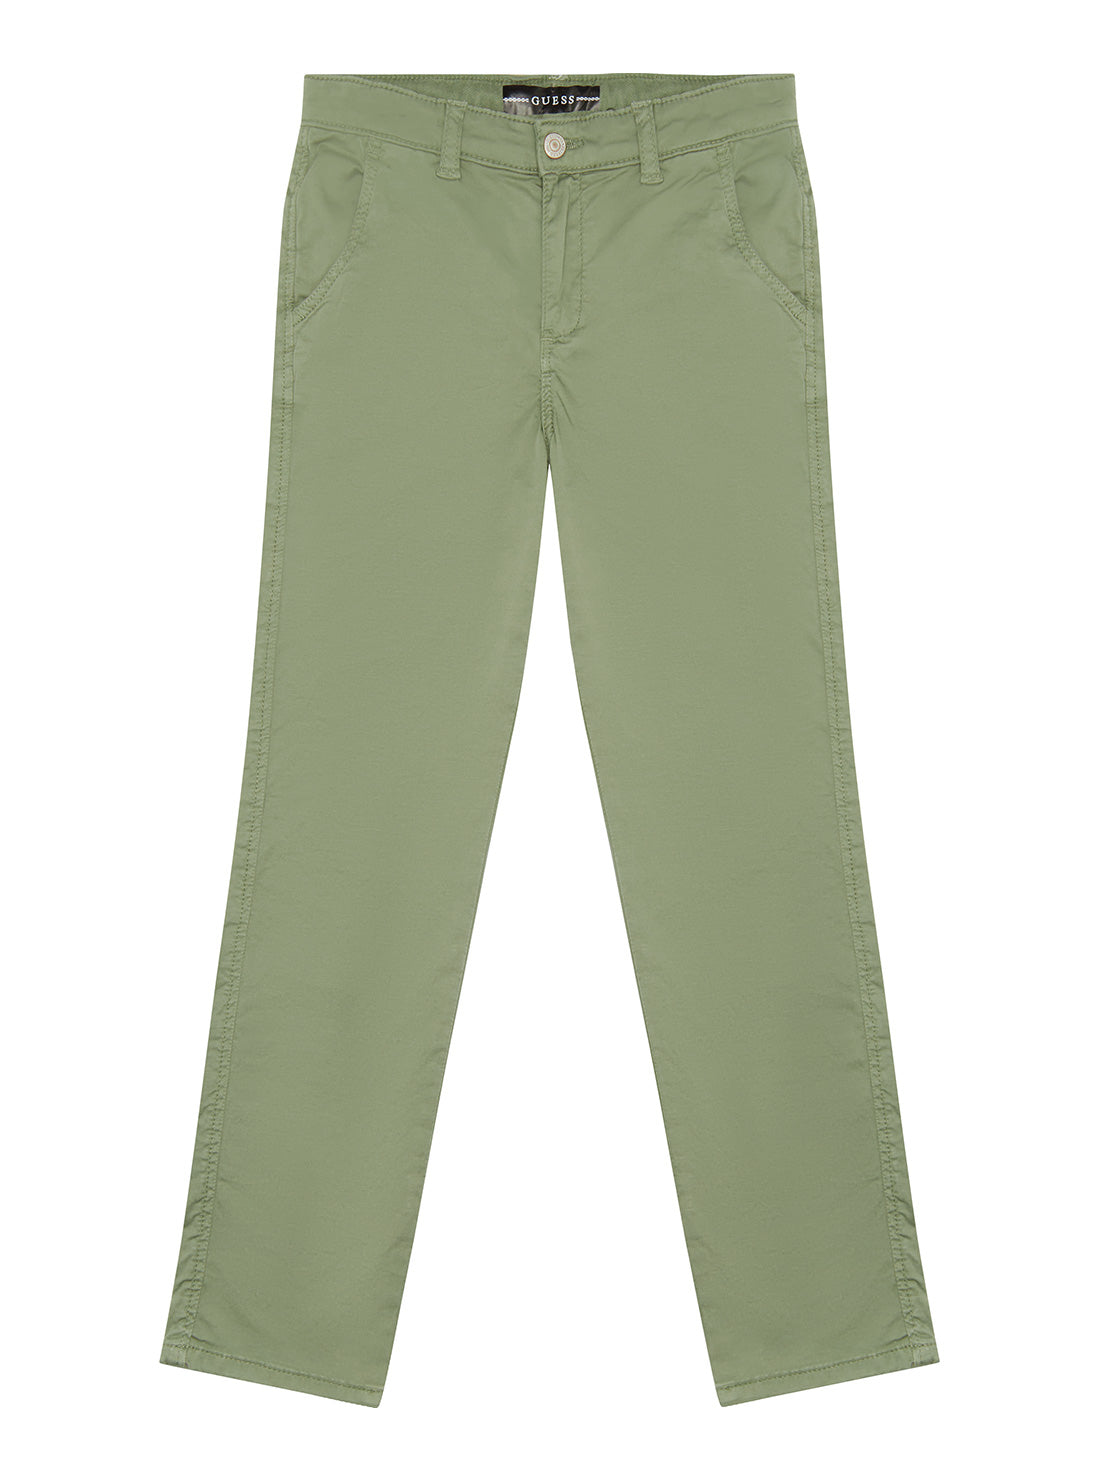 GUESS Little Boy Green Sateen Chino Pants (2-7) N2GB01WEHX3 Front View